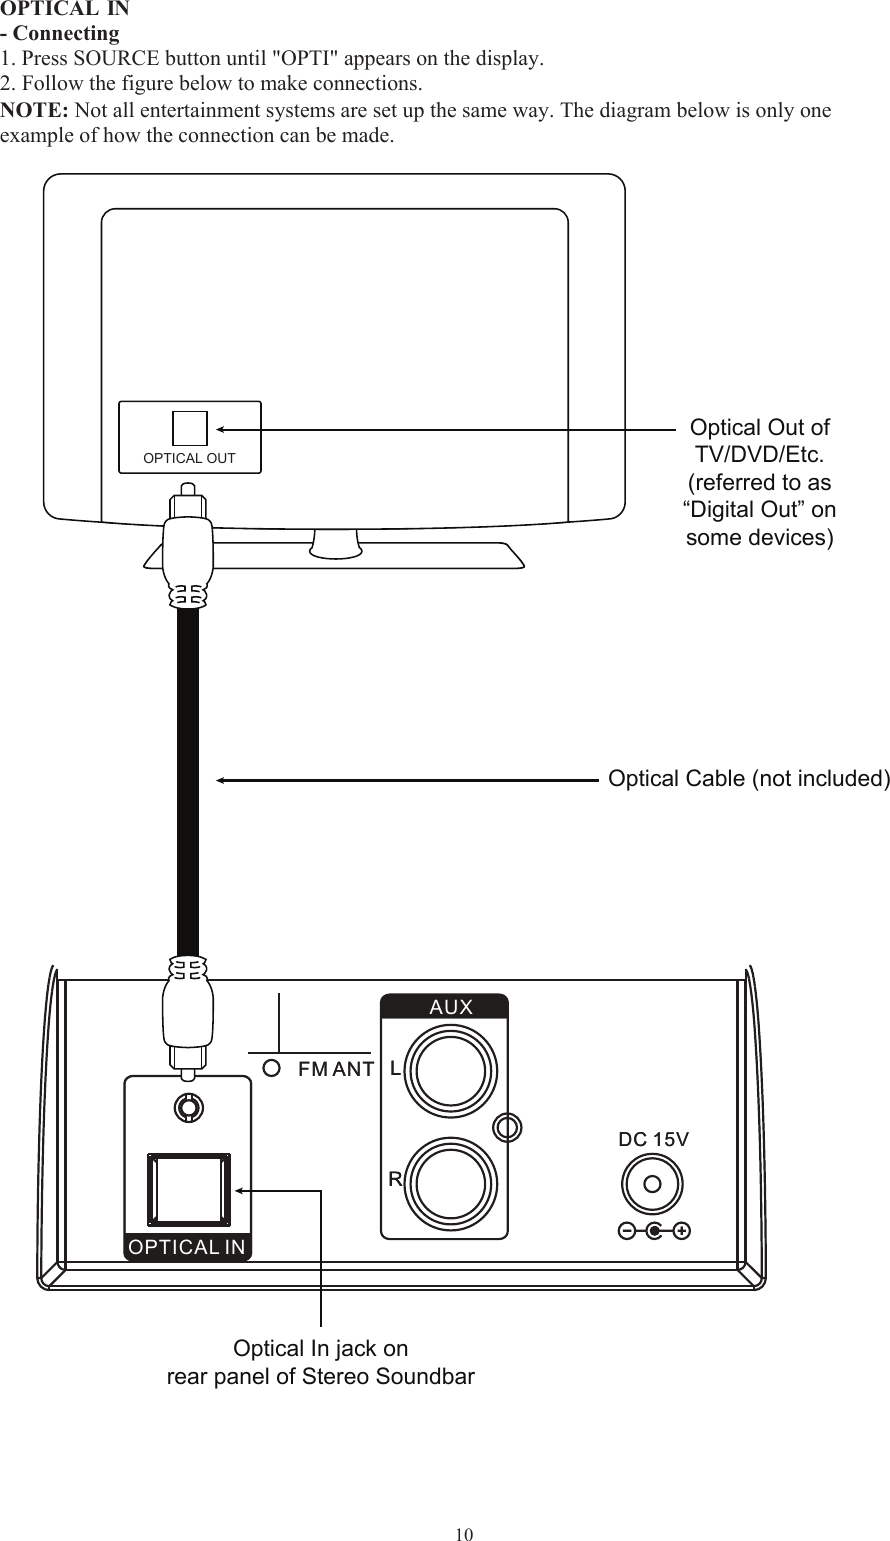   10  OPTICAL  IN - Connecting 1. Press SOURCE button until &quot;OPTI&quot; appears on the display.2.NOTE: Not all entertainment systems are set up the same way. The diagram below is only oneexample of how the connection can be made. Follow the figure below to make connections.                           Optical Out ofTV/DVD/Etc.(referred to as“Digital Out” onsome devices)Optical Cable (not included)OPTICAL OUTOptical In jack onrear panel of Stereo SoundbarAUX 2OPTICAL INFM ANTDC 15VAUX OPTICAL INFM ANTDC 15V